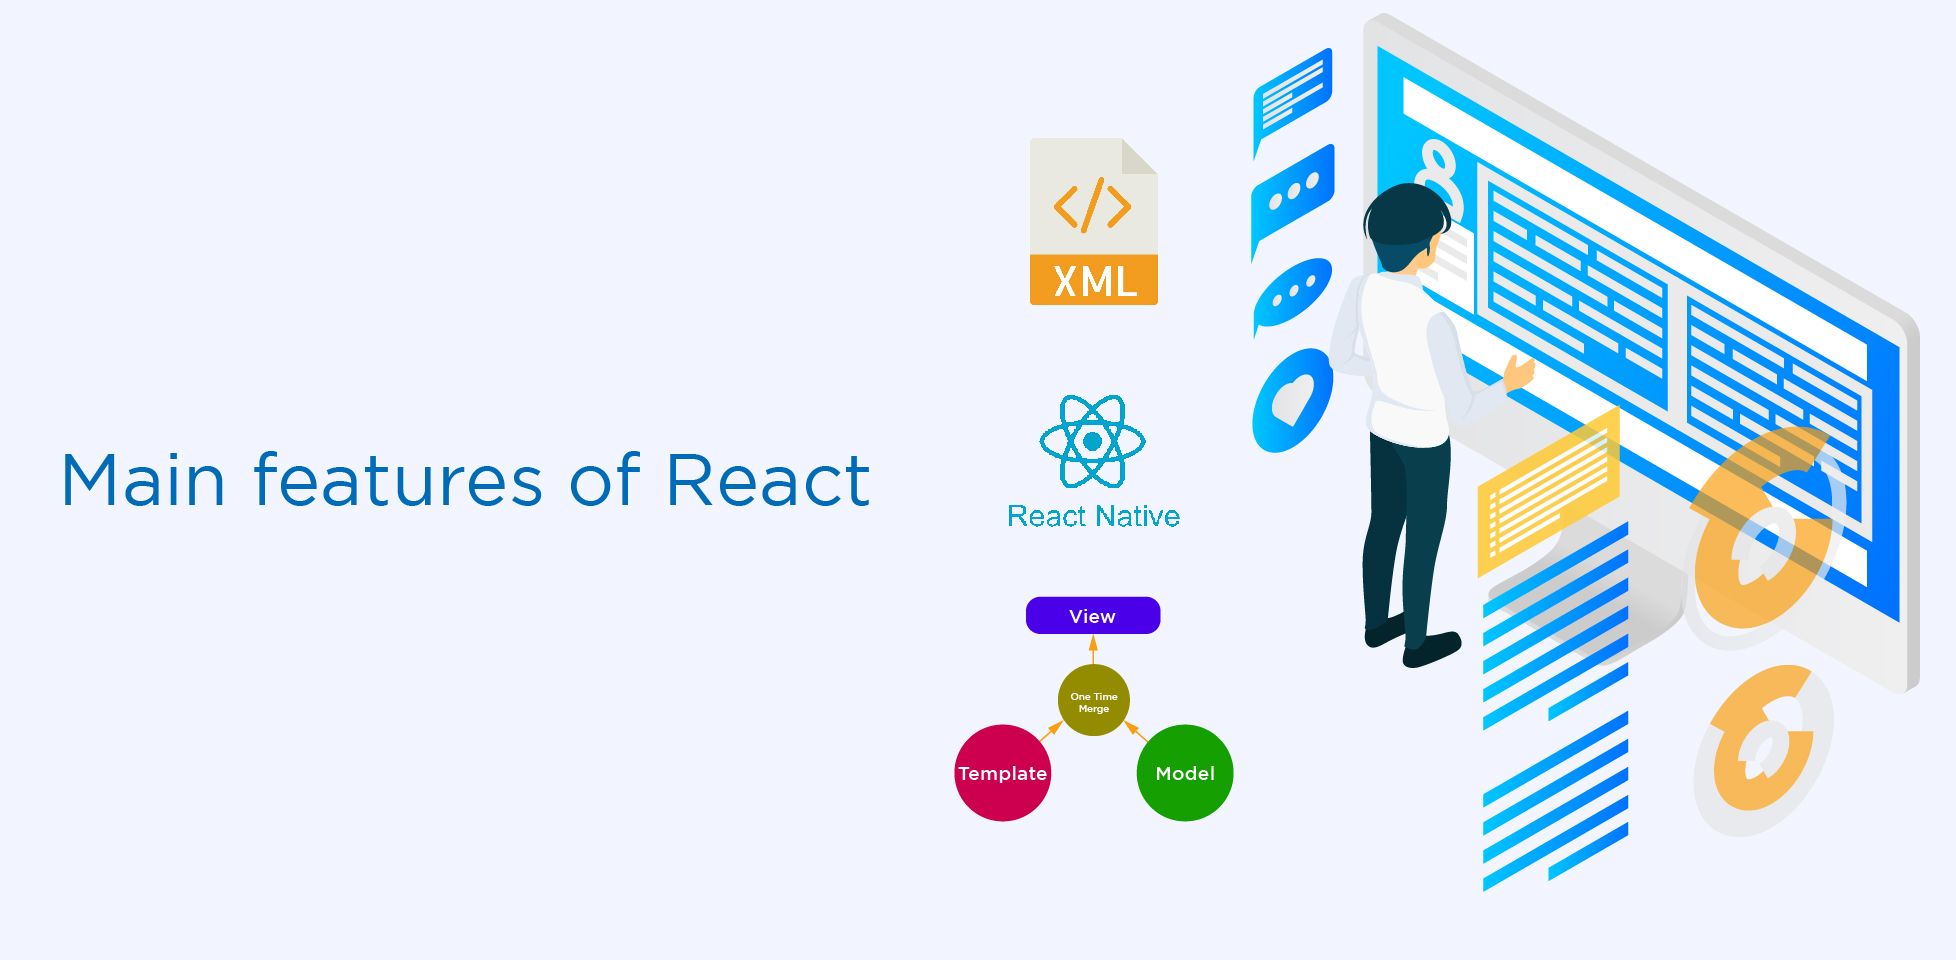 Main features of React 